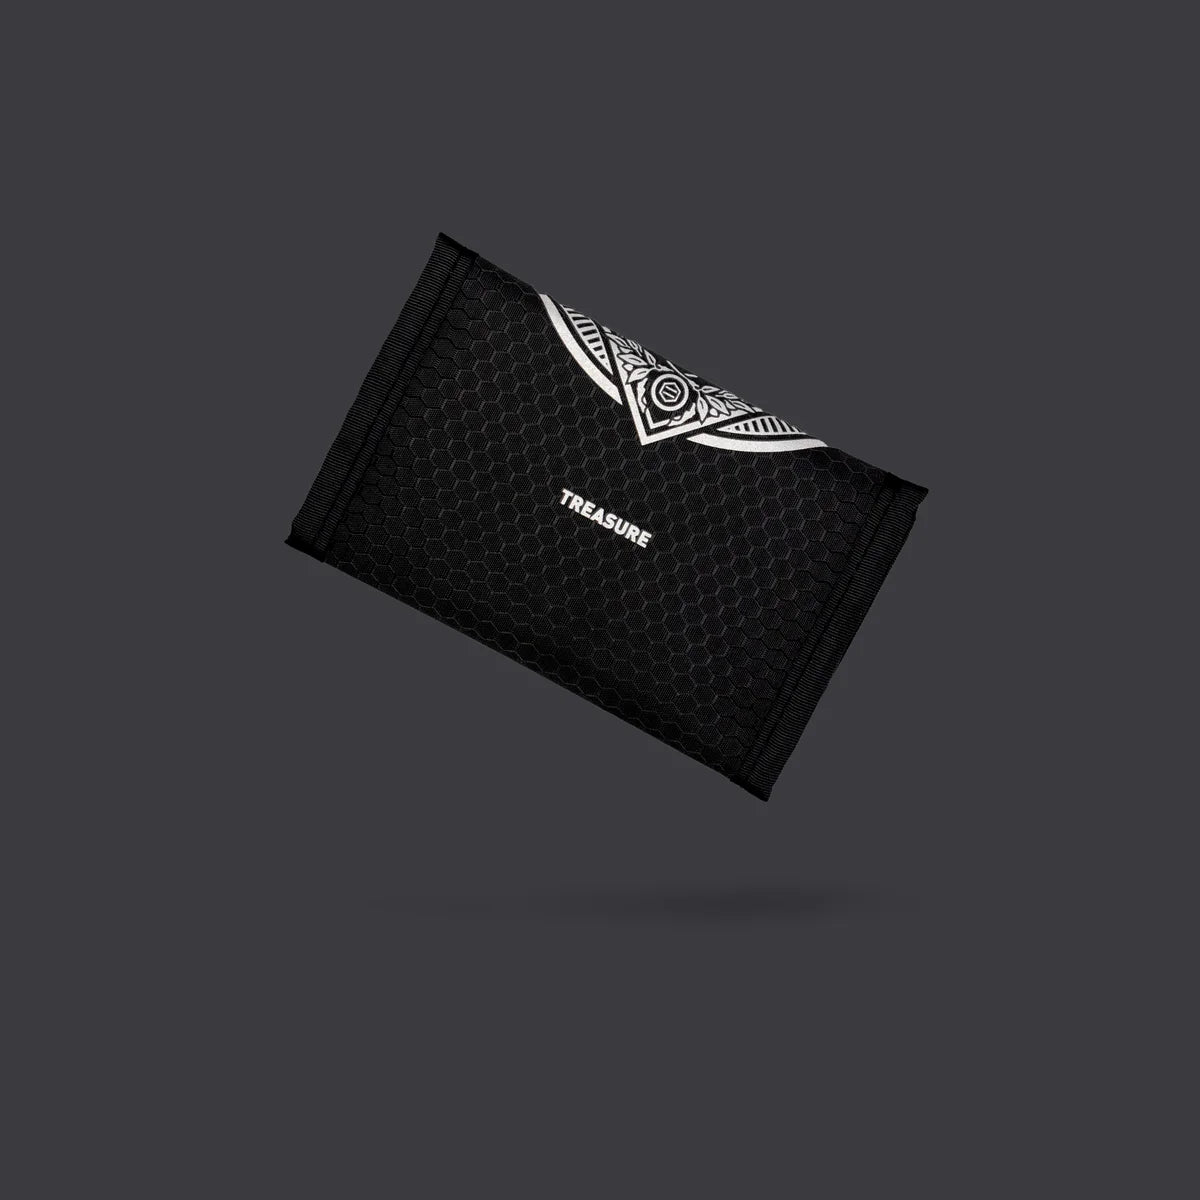 DLYNR Corporate Reflective Wallet